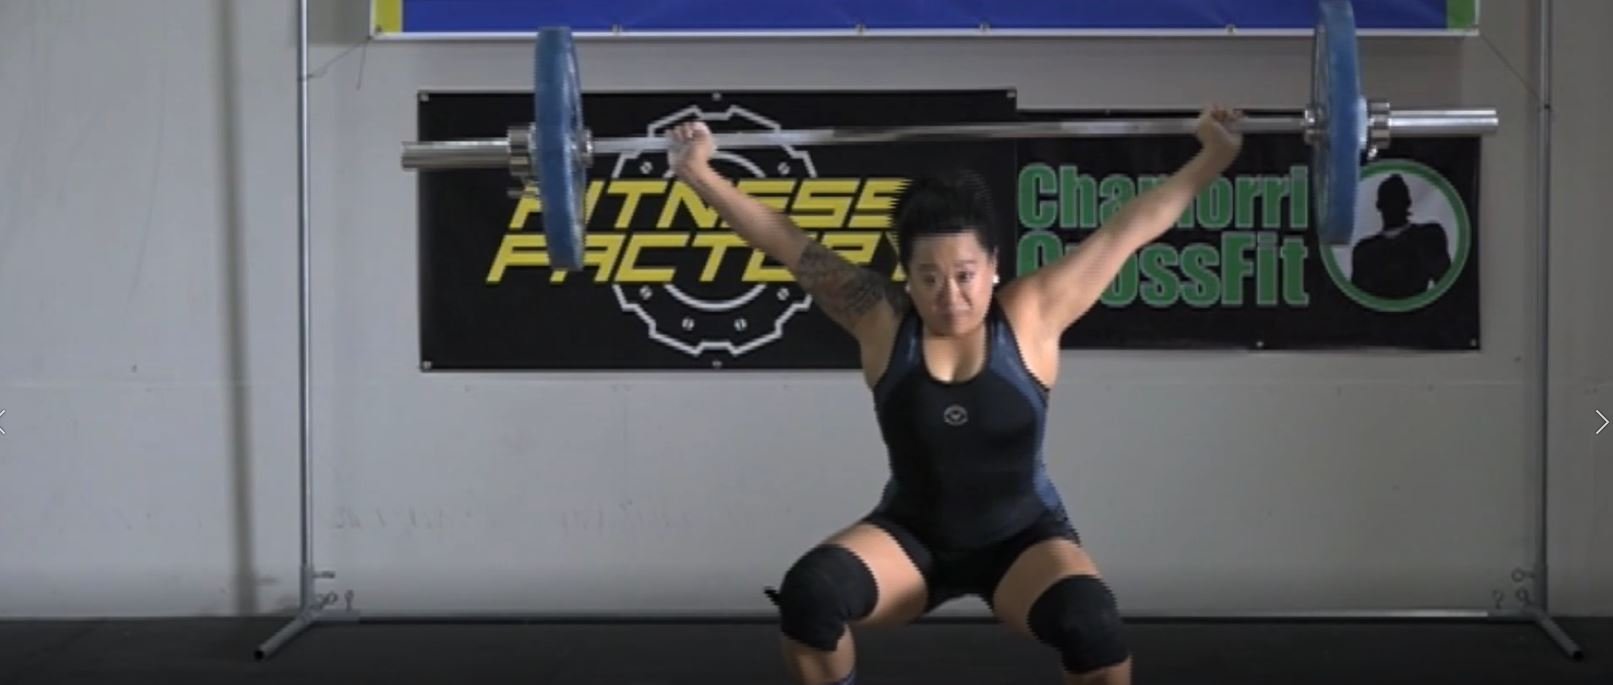 Pacific Games preview Team Guam weightlifting